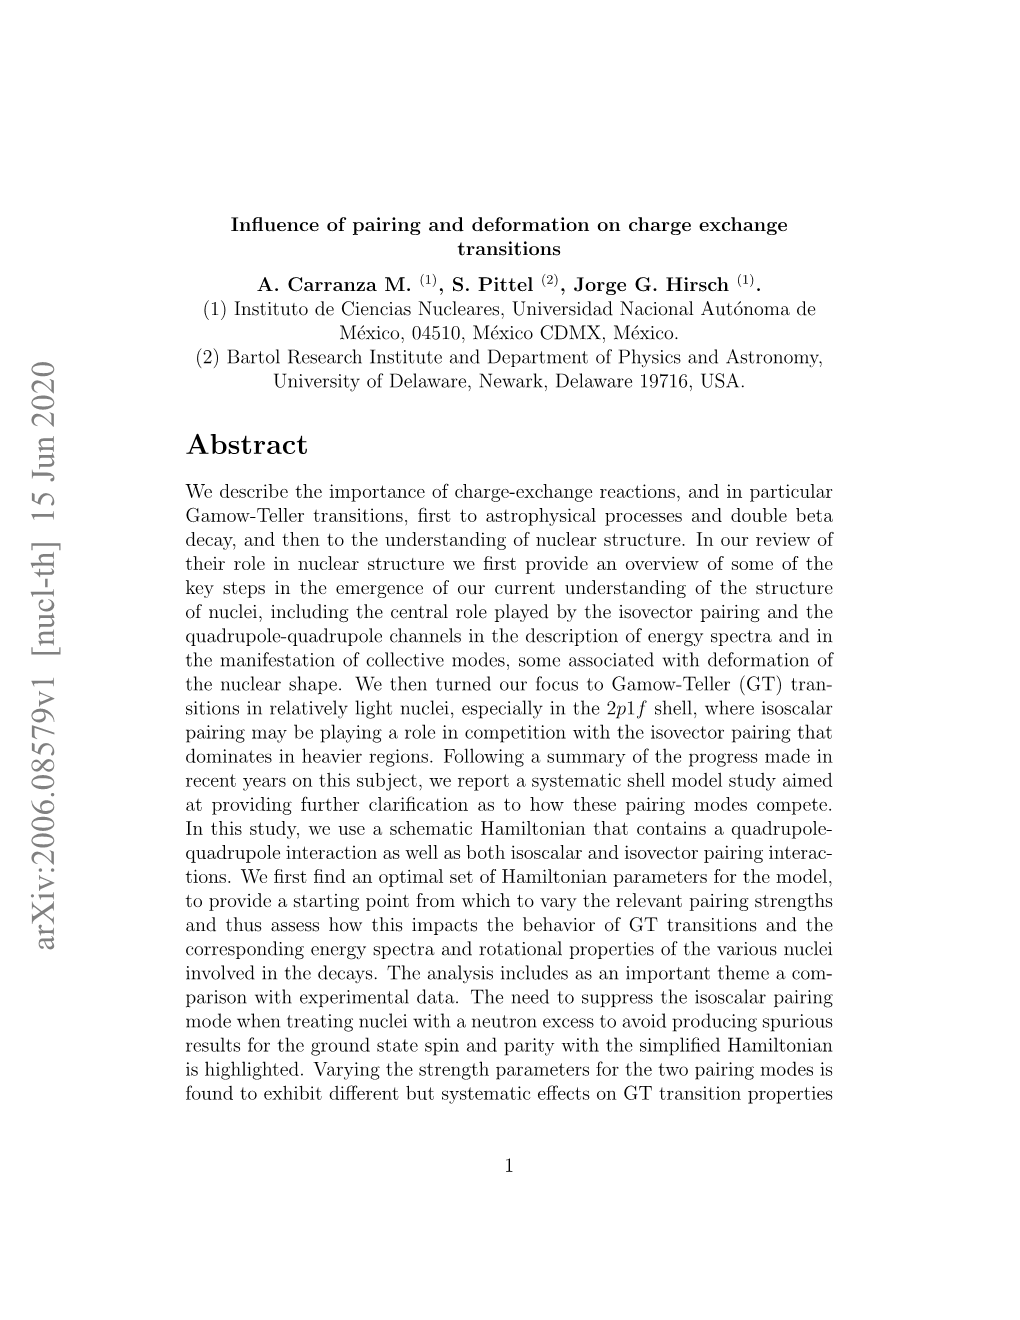 Influence of Pairing and Deformation on Charge Exchange Transitions